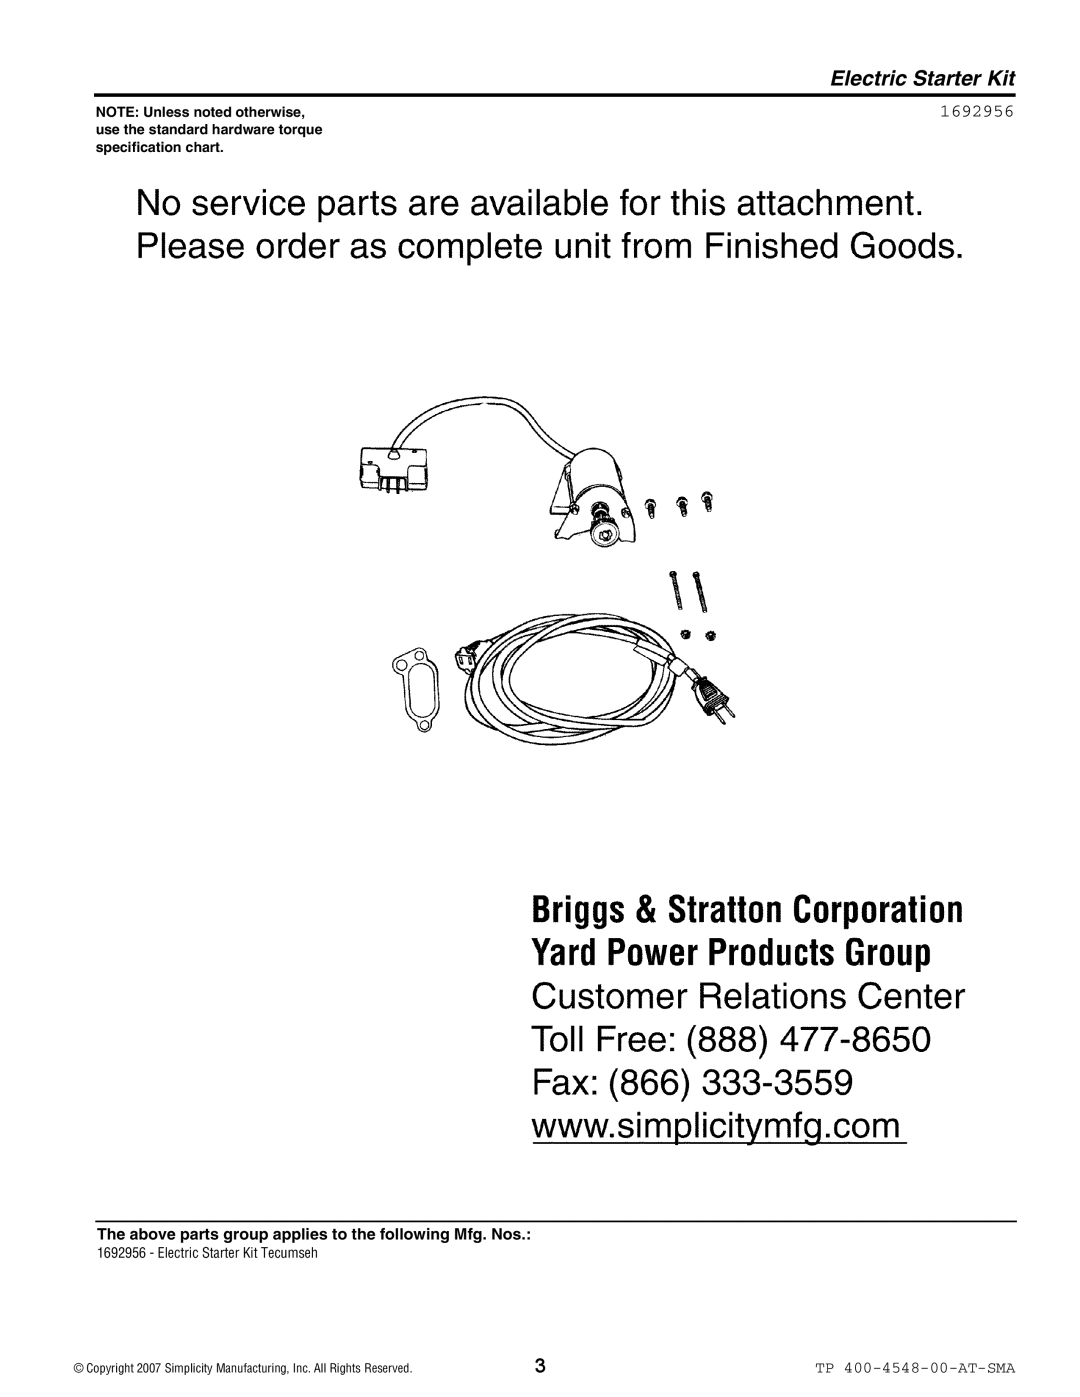 Simplicity Lawn and Garden Electric Starter Kit, NOTE Unless noted otherwise, use the standard hardware torque, 1692956 